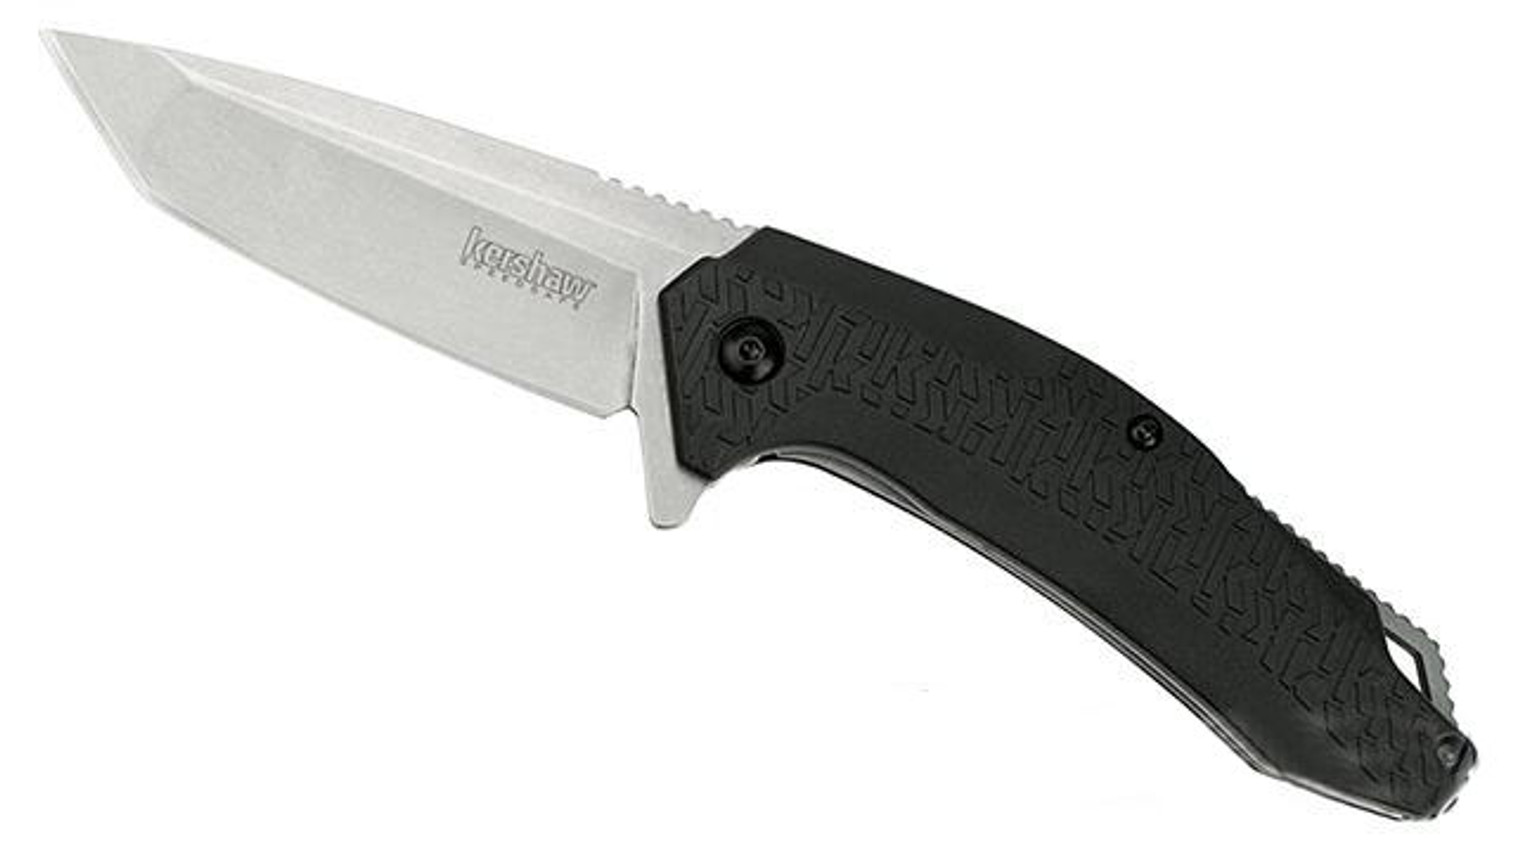 Kershaw FreefallFolding Knife with 3.125" Blade and Speed Assist Opening